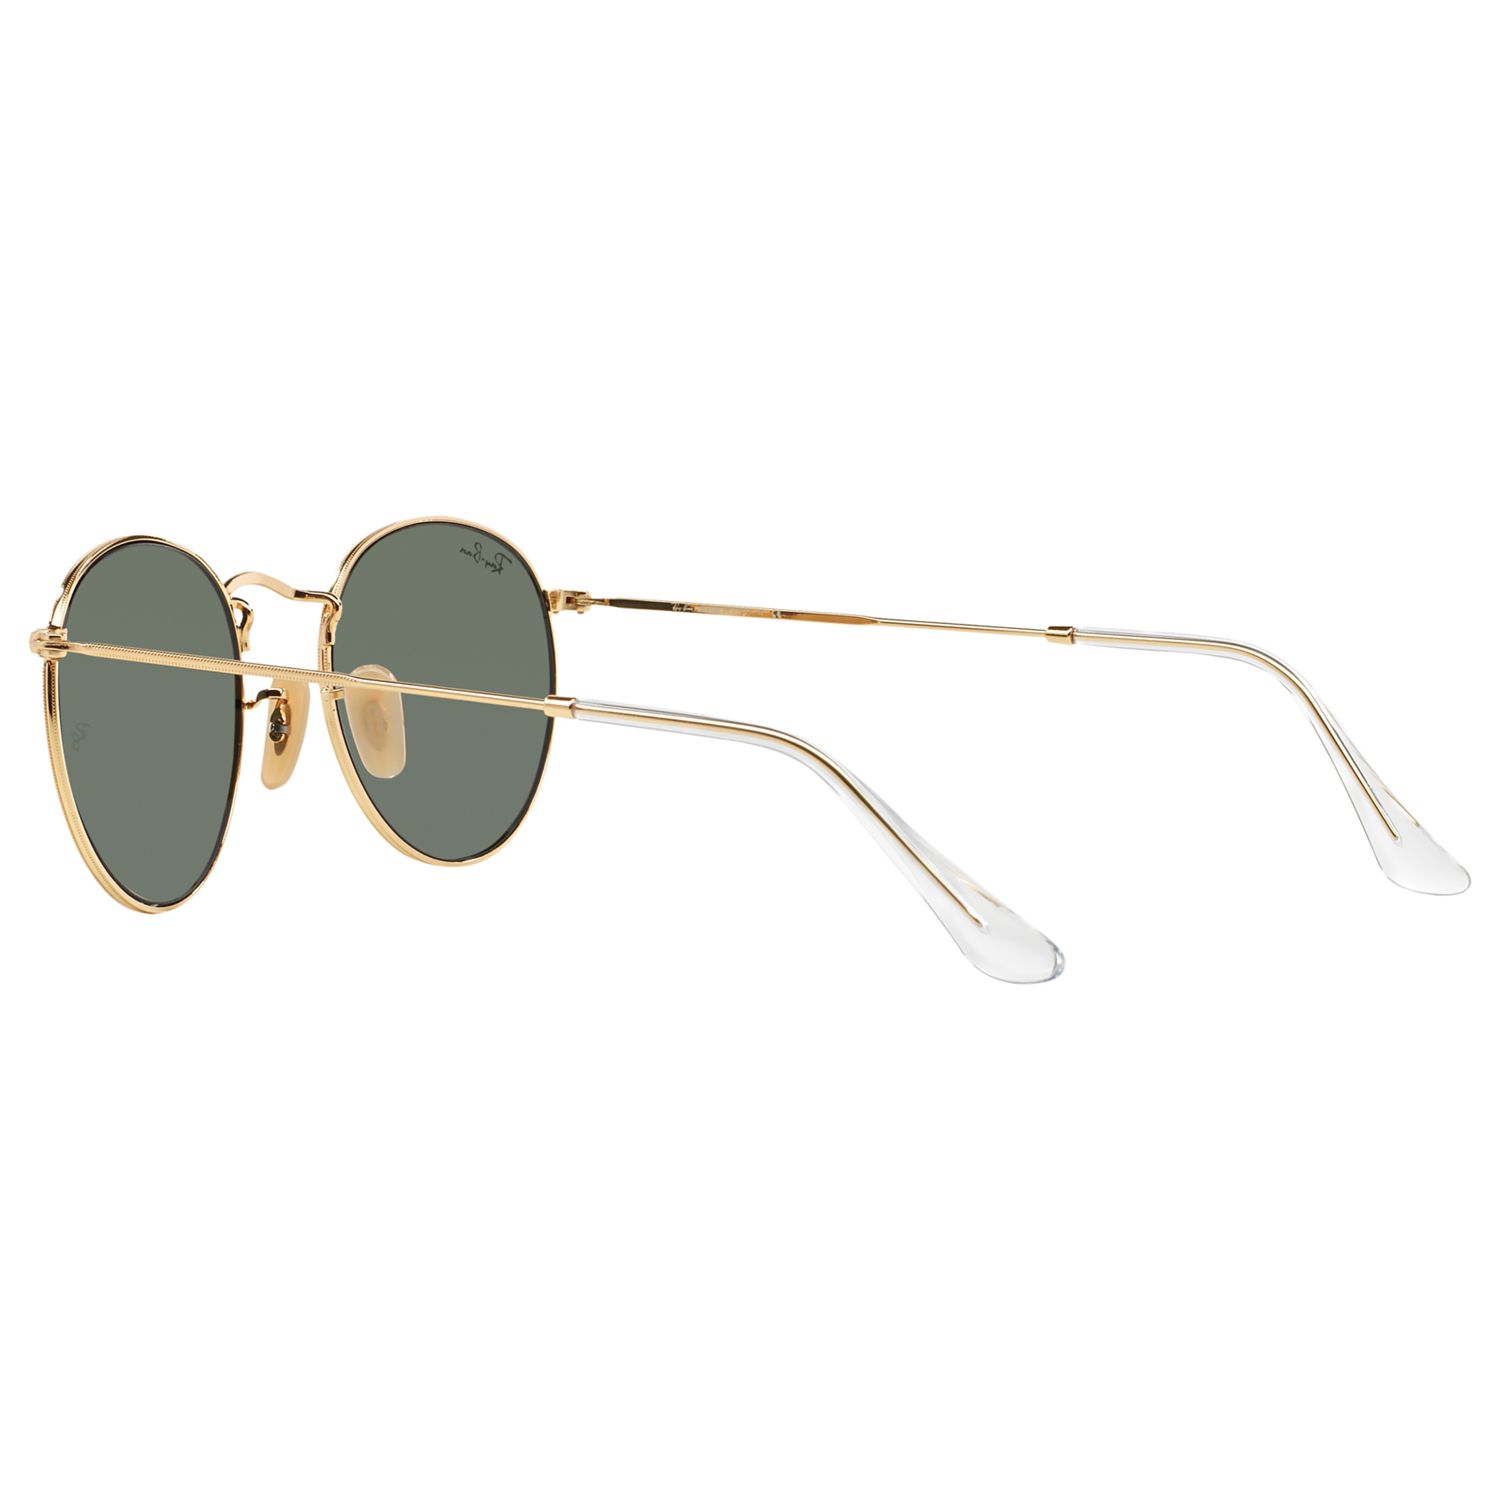 Buy Ray-Ban RB3447 Round Metal Sunglasses Online at johnlewis.com